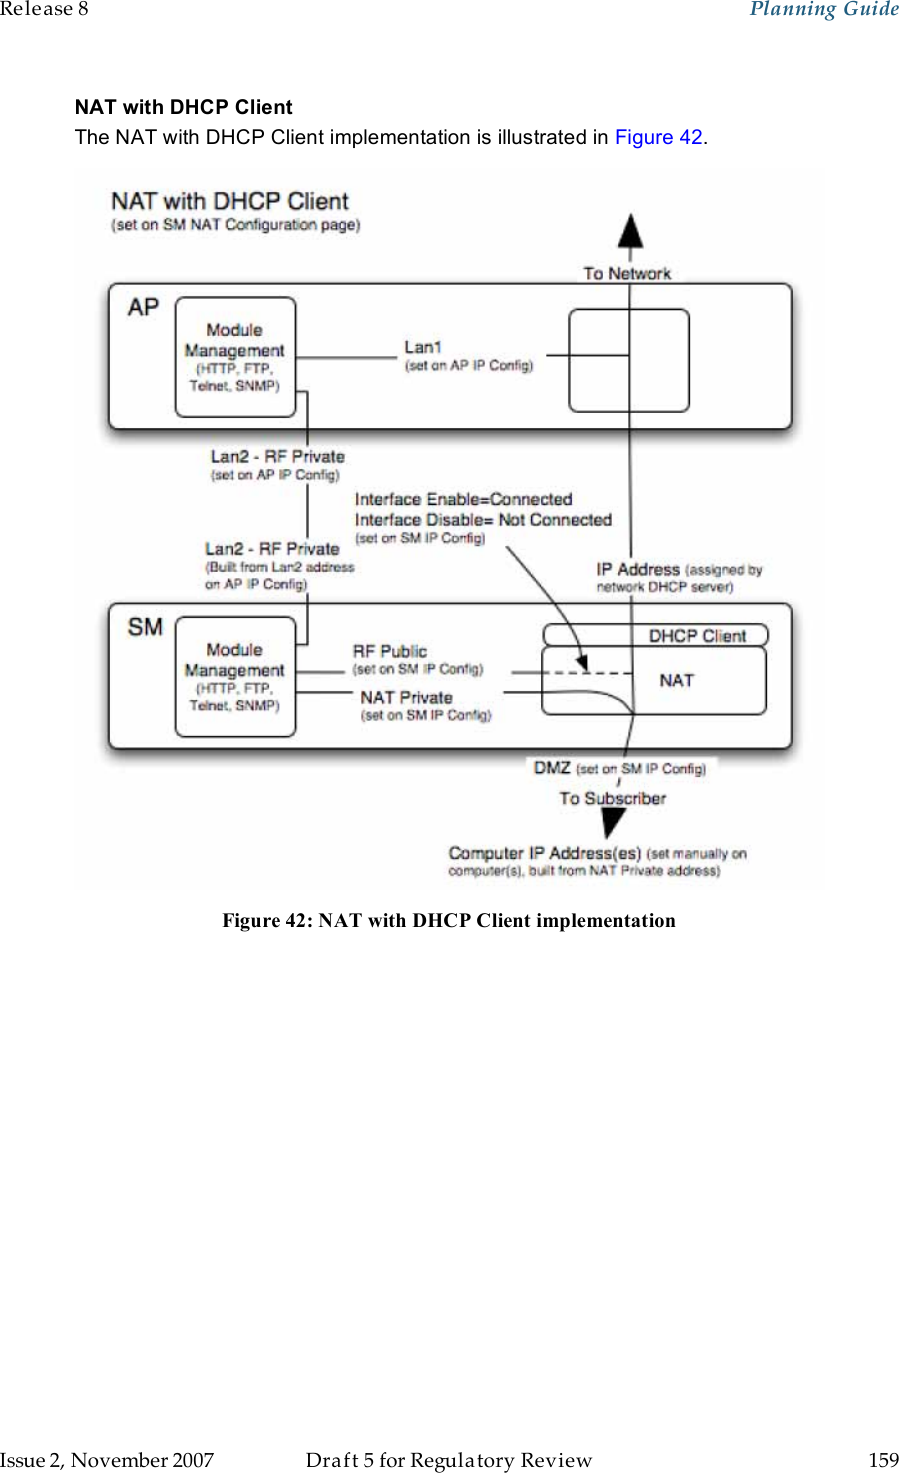 Release 8    Planning Guide                  March 200                  Through Software Release 6.   Issue 2, November 2007  Draft 5 for Regulatory Review  159     NAT with DHCP Client The NAT with DHCP Client implementation is illustrated in Figure 42.  Figure 42: NAT with DHCP Client implementation 